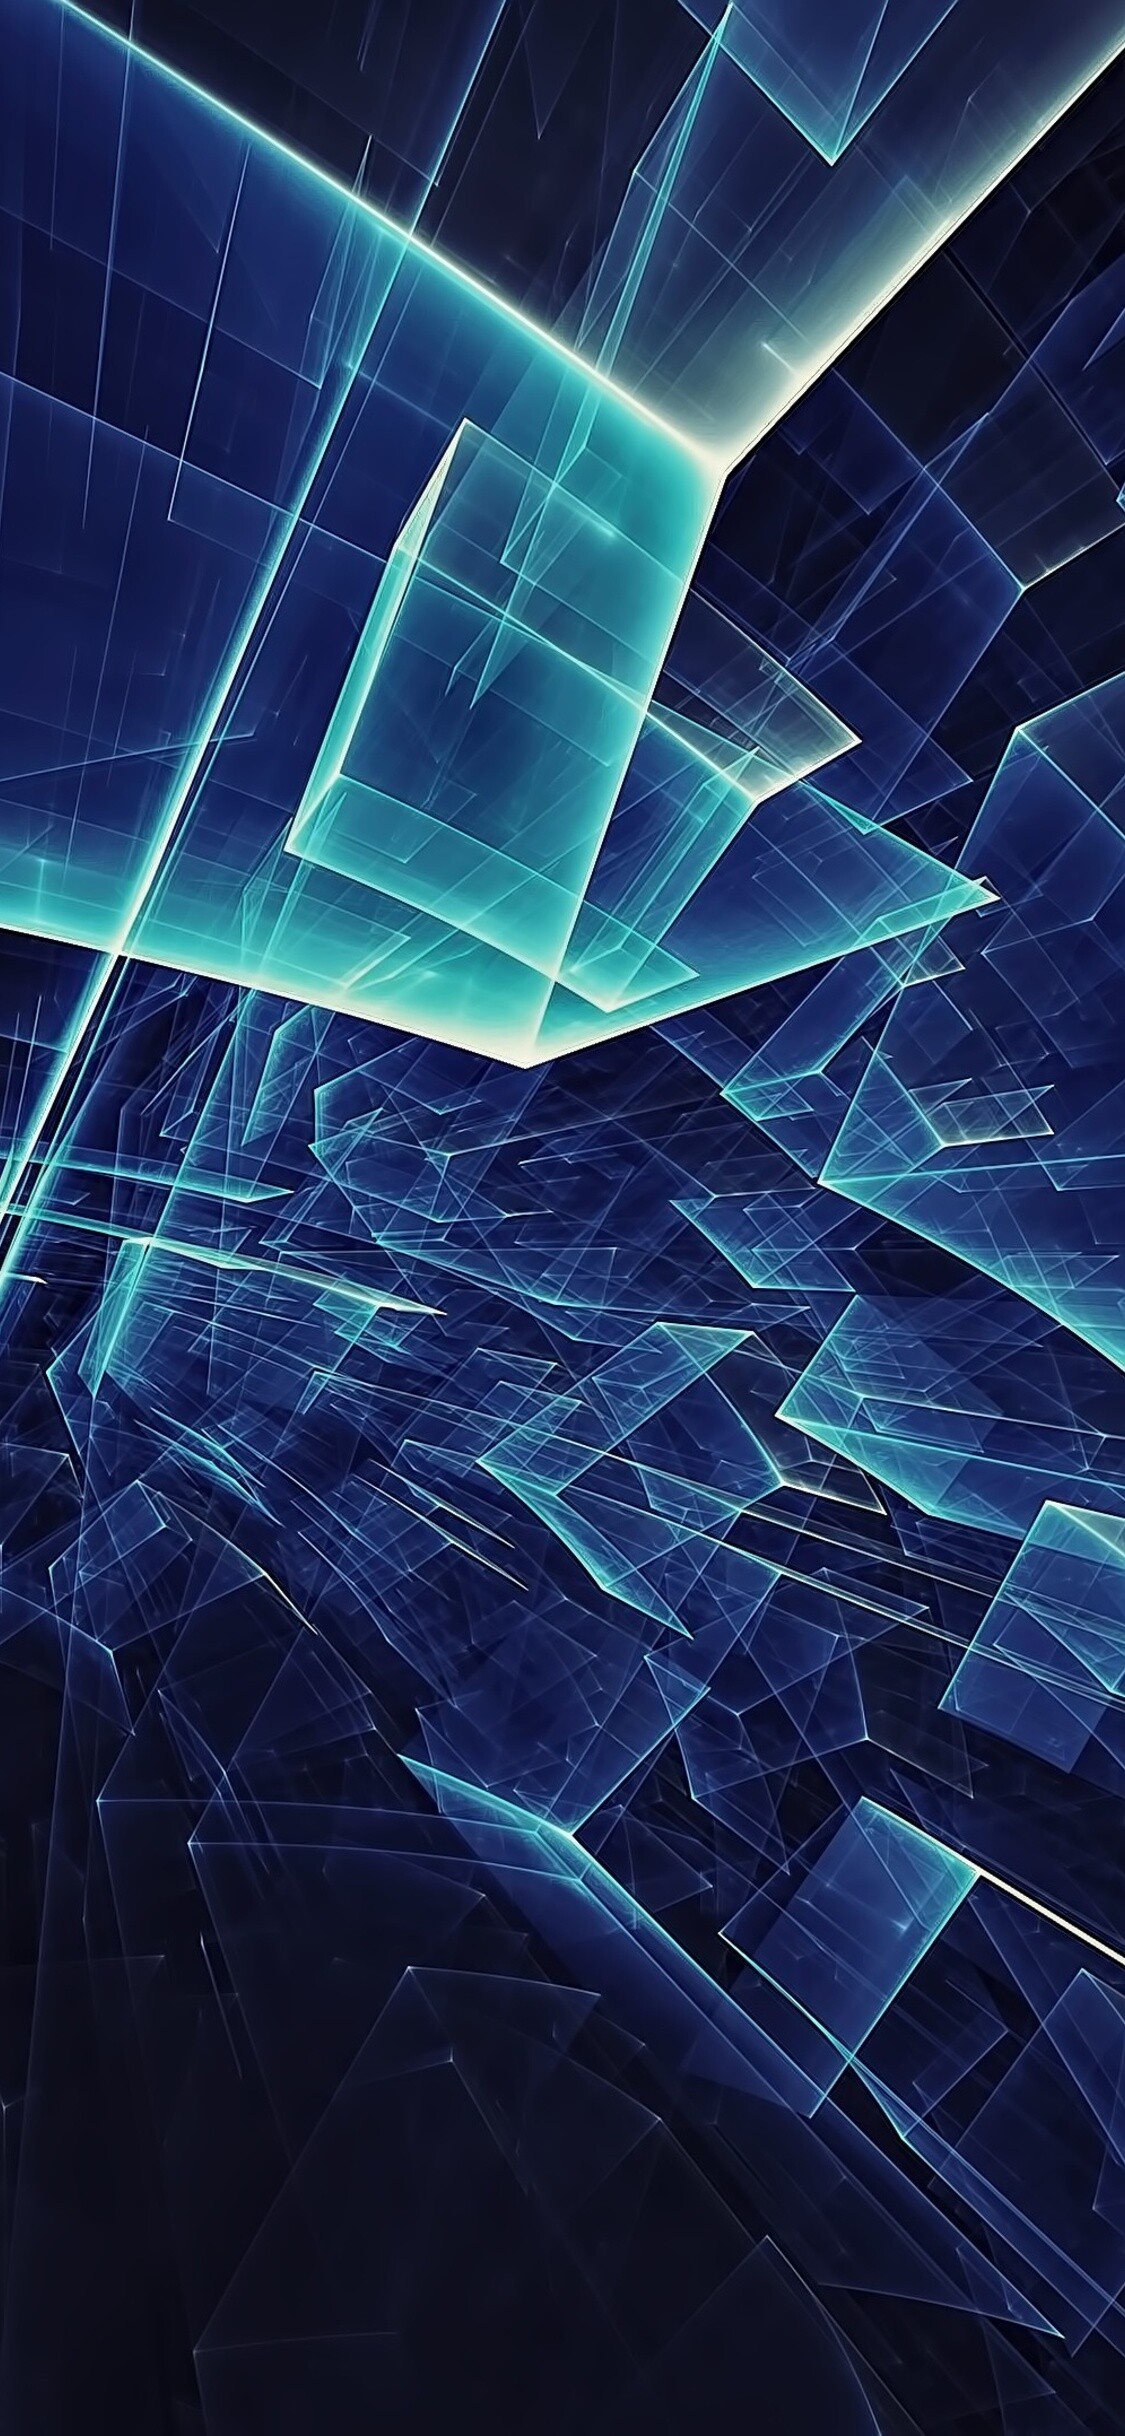 Geometry: Abstract, Glass, Cubes, Right triangular prism. 1130x2440 HD Wallpaper.